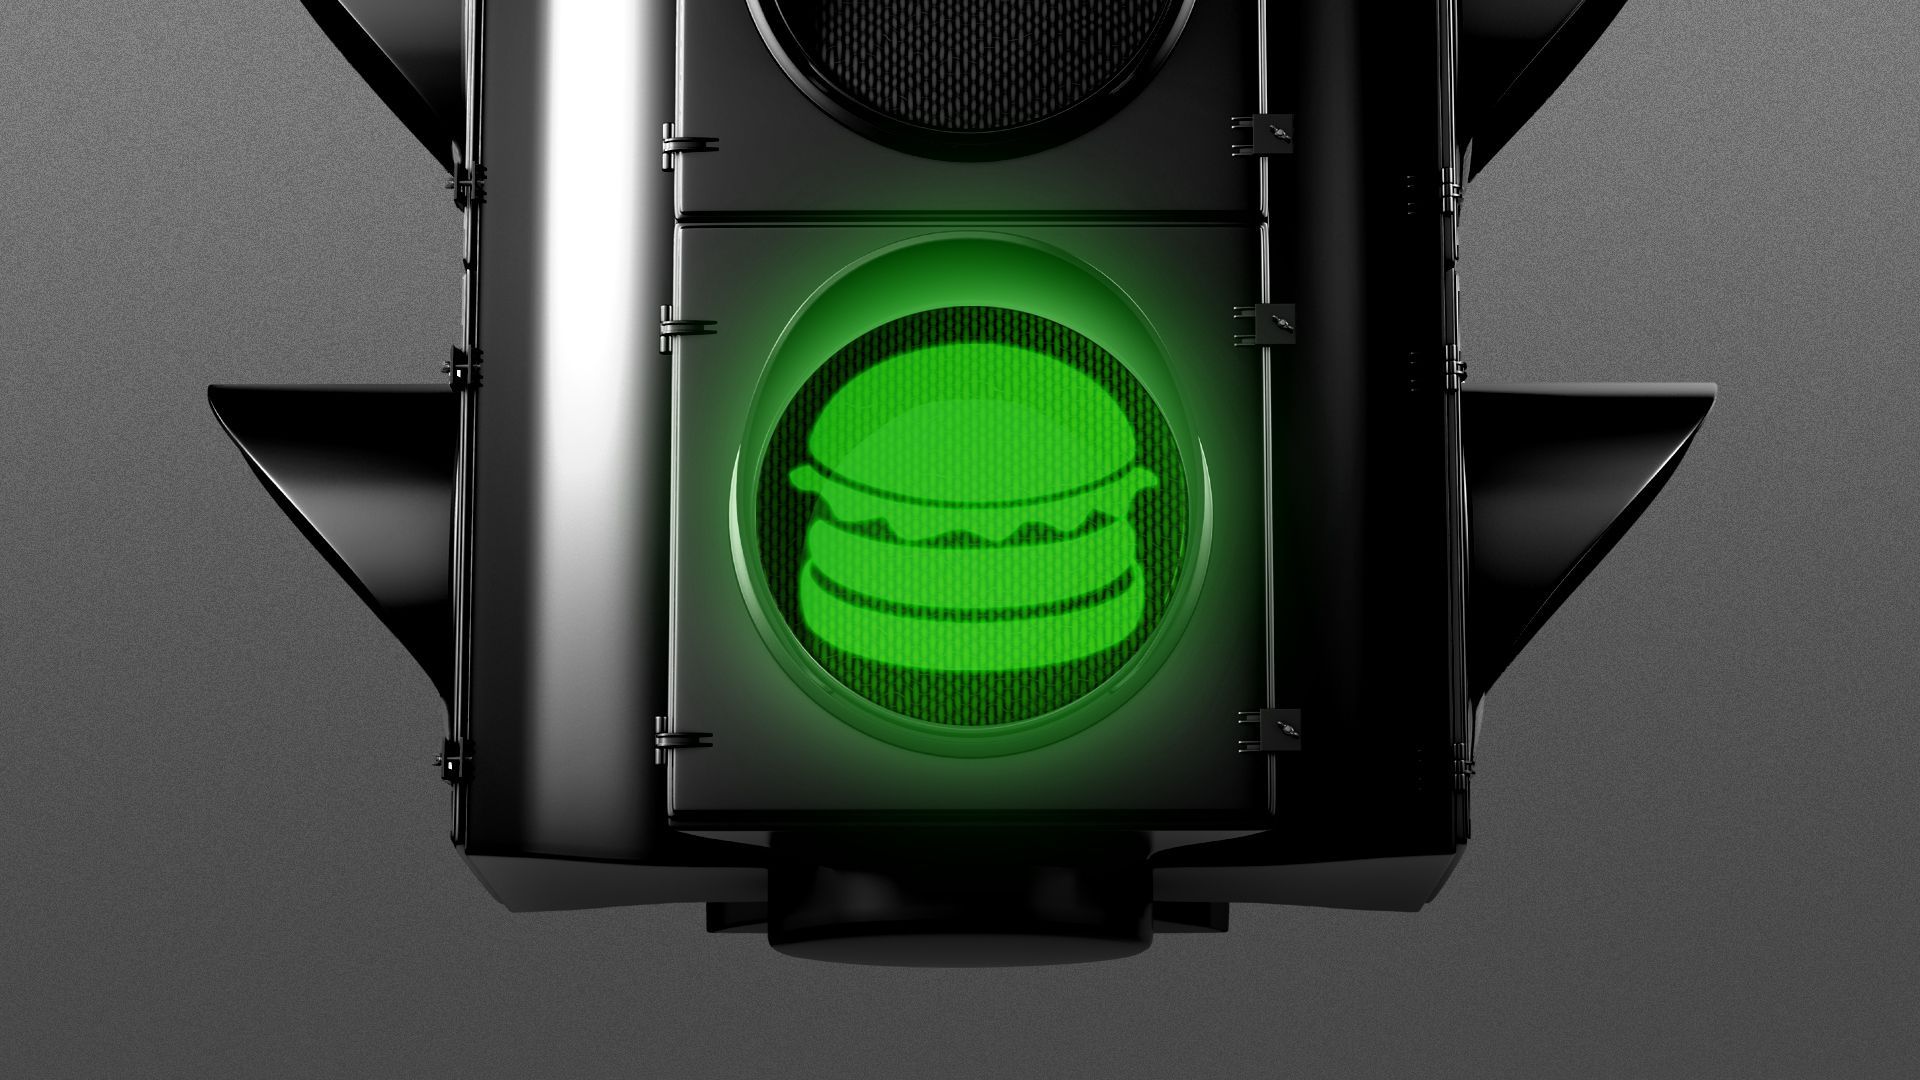 Illustration of a stoplight with the green light in the shape of a hamburger